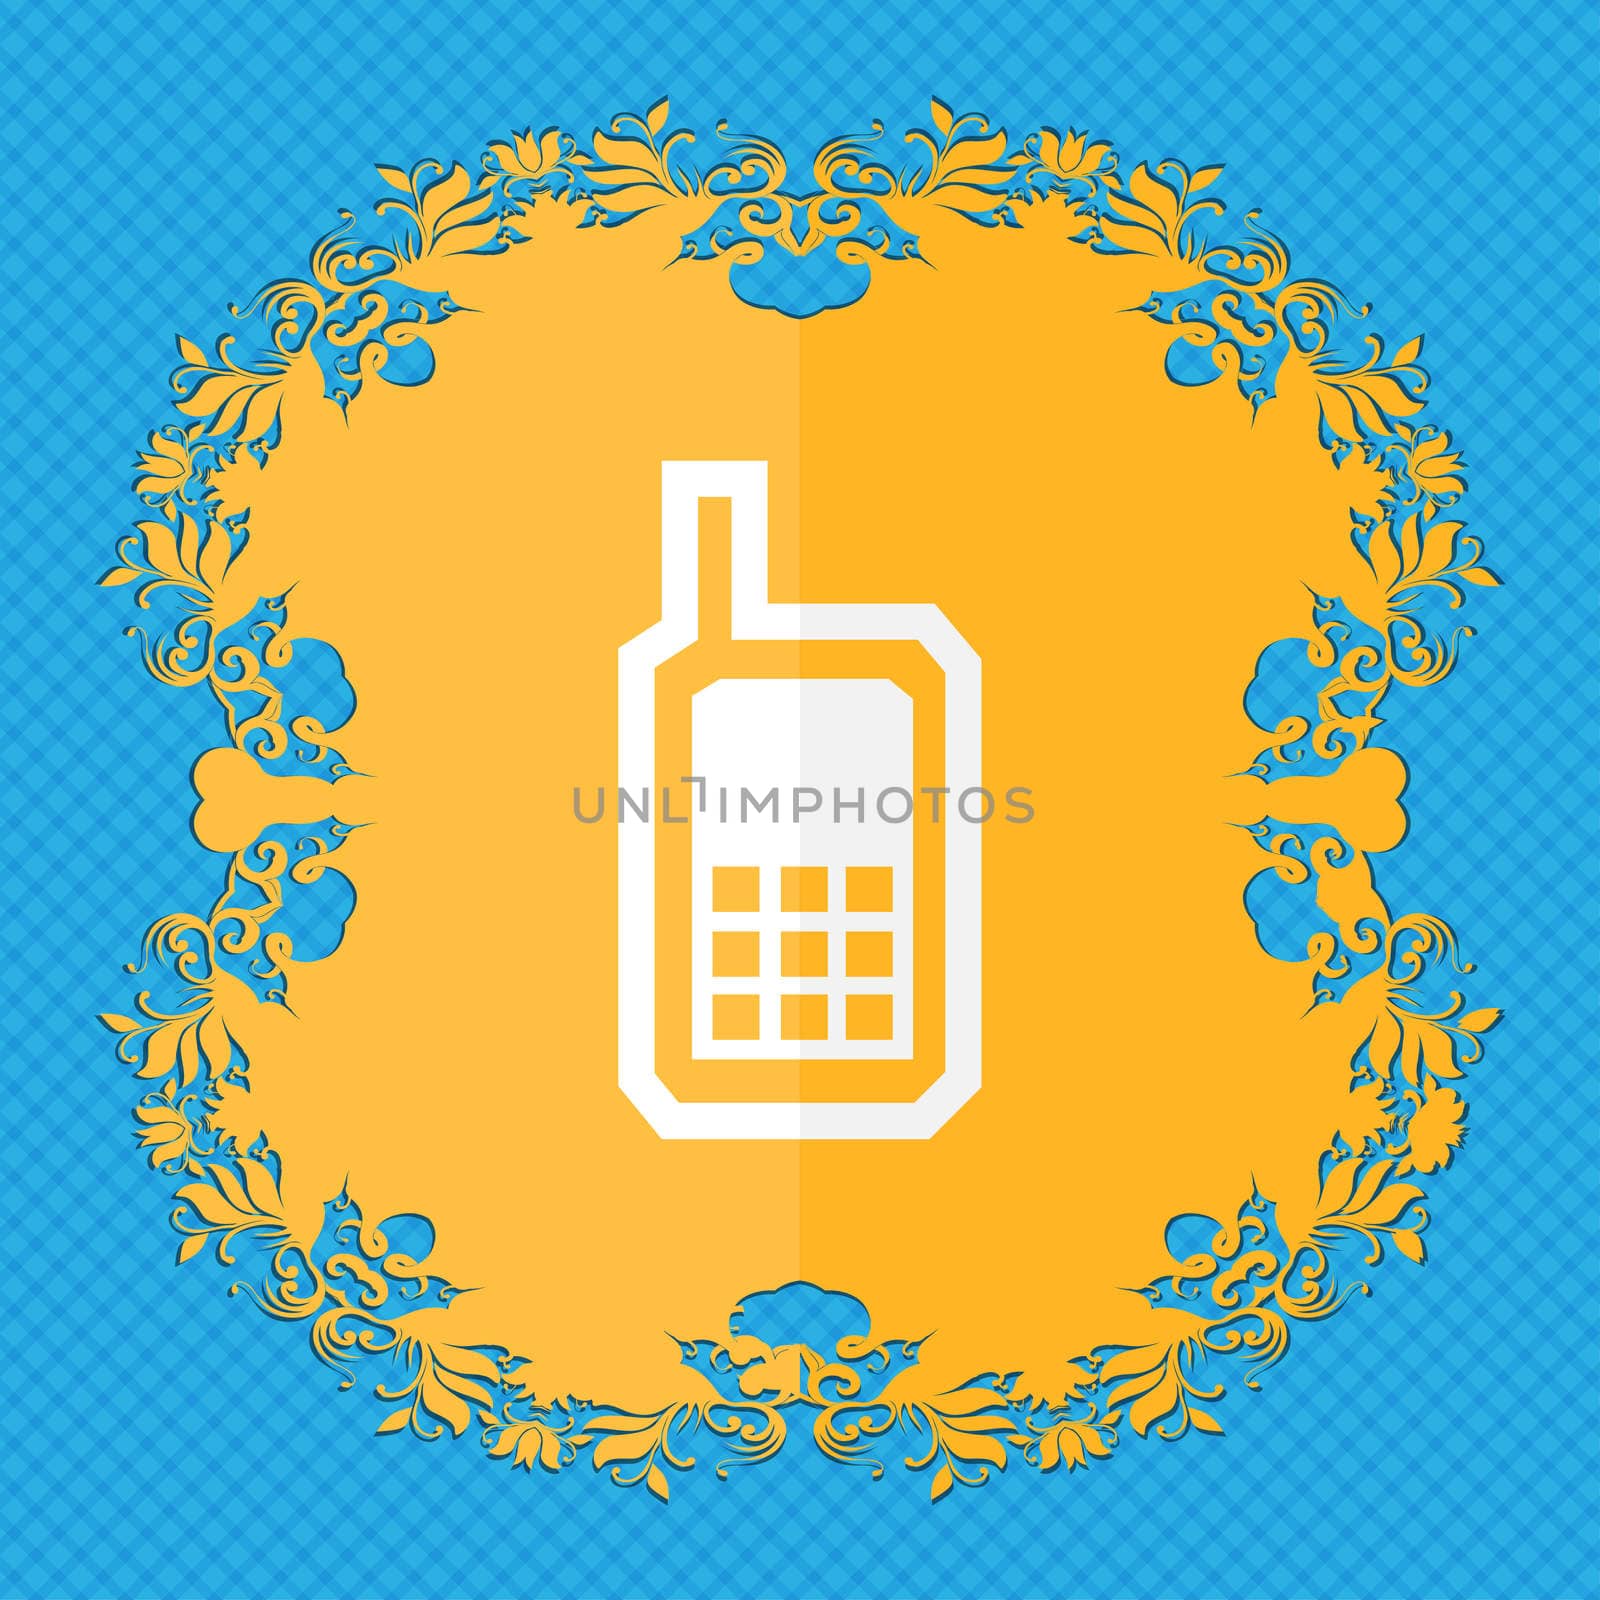 Mobile phone. Floral flat design on a blue abstract background with place for your text. illustration